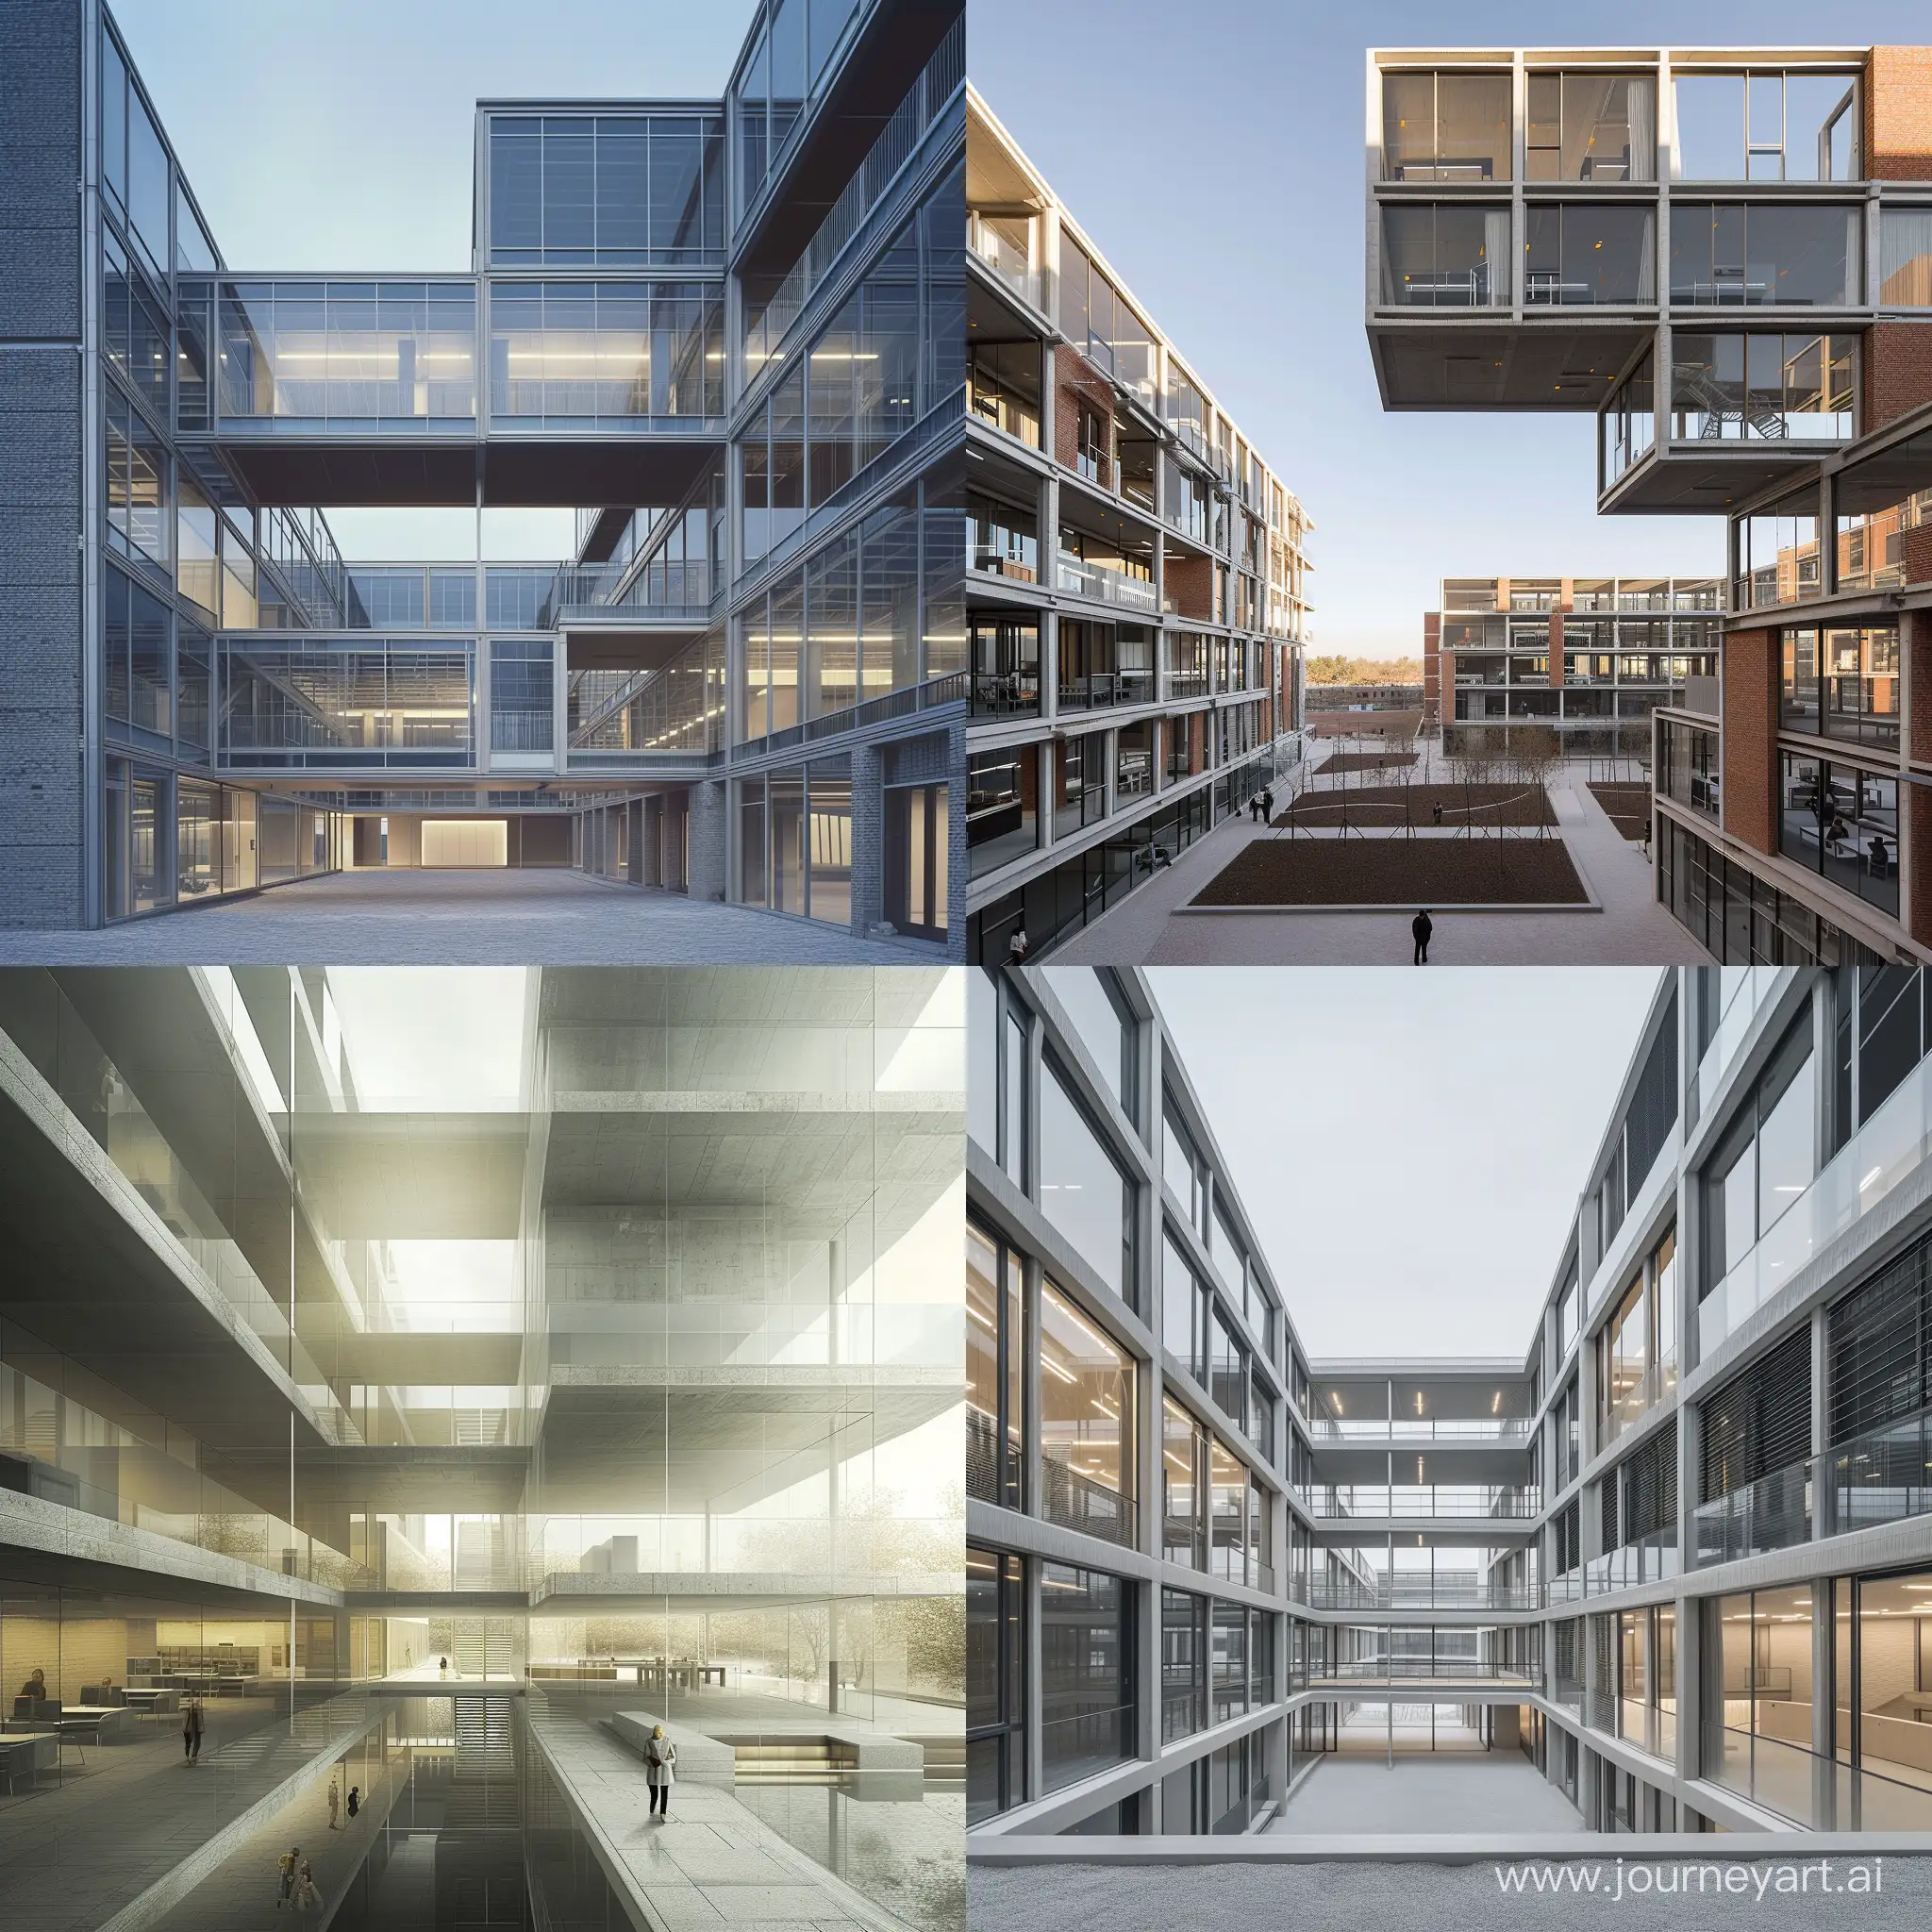 Modern-Institutional-Building-Contest-Architectural-Showcase-with-Clean-Lines-and-Open-Spaces